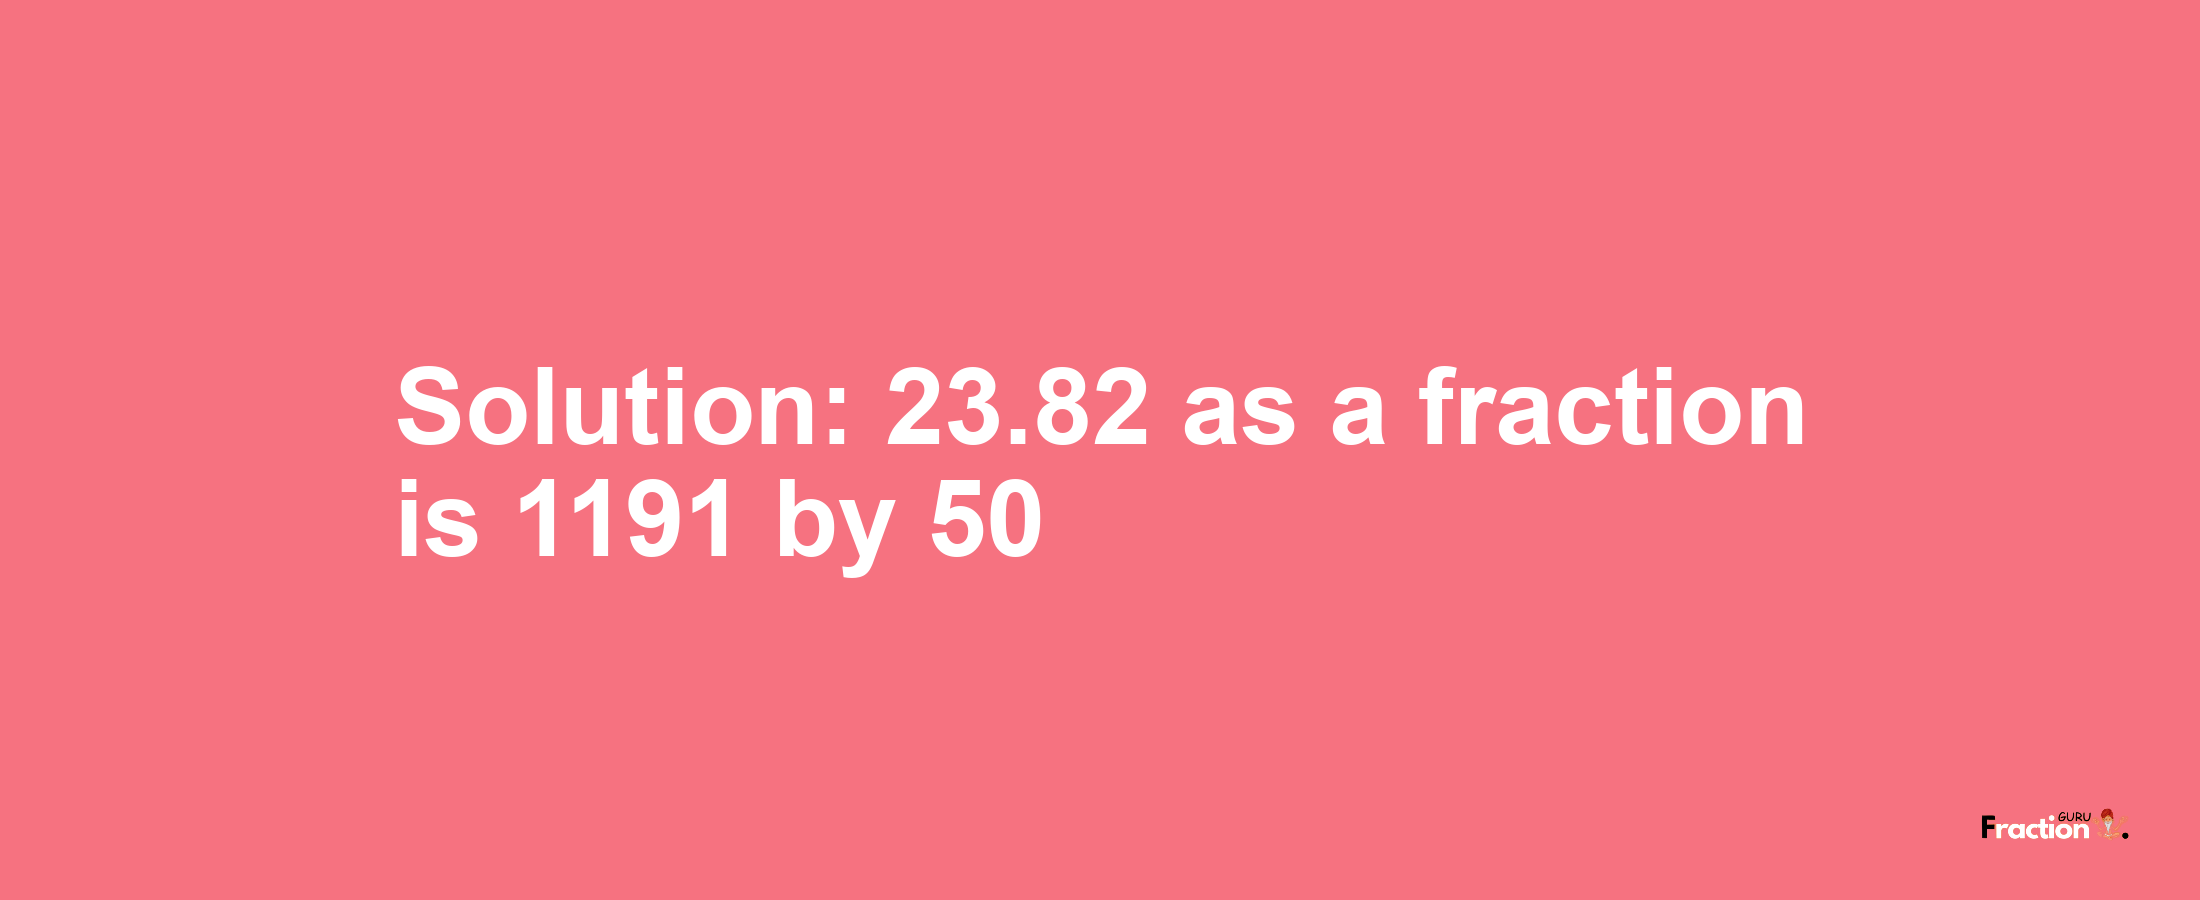 Solution:23.82 as a fraction is 1191/50